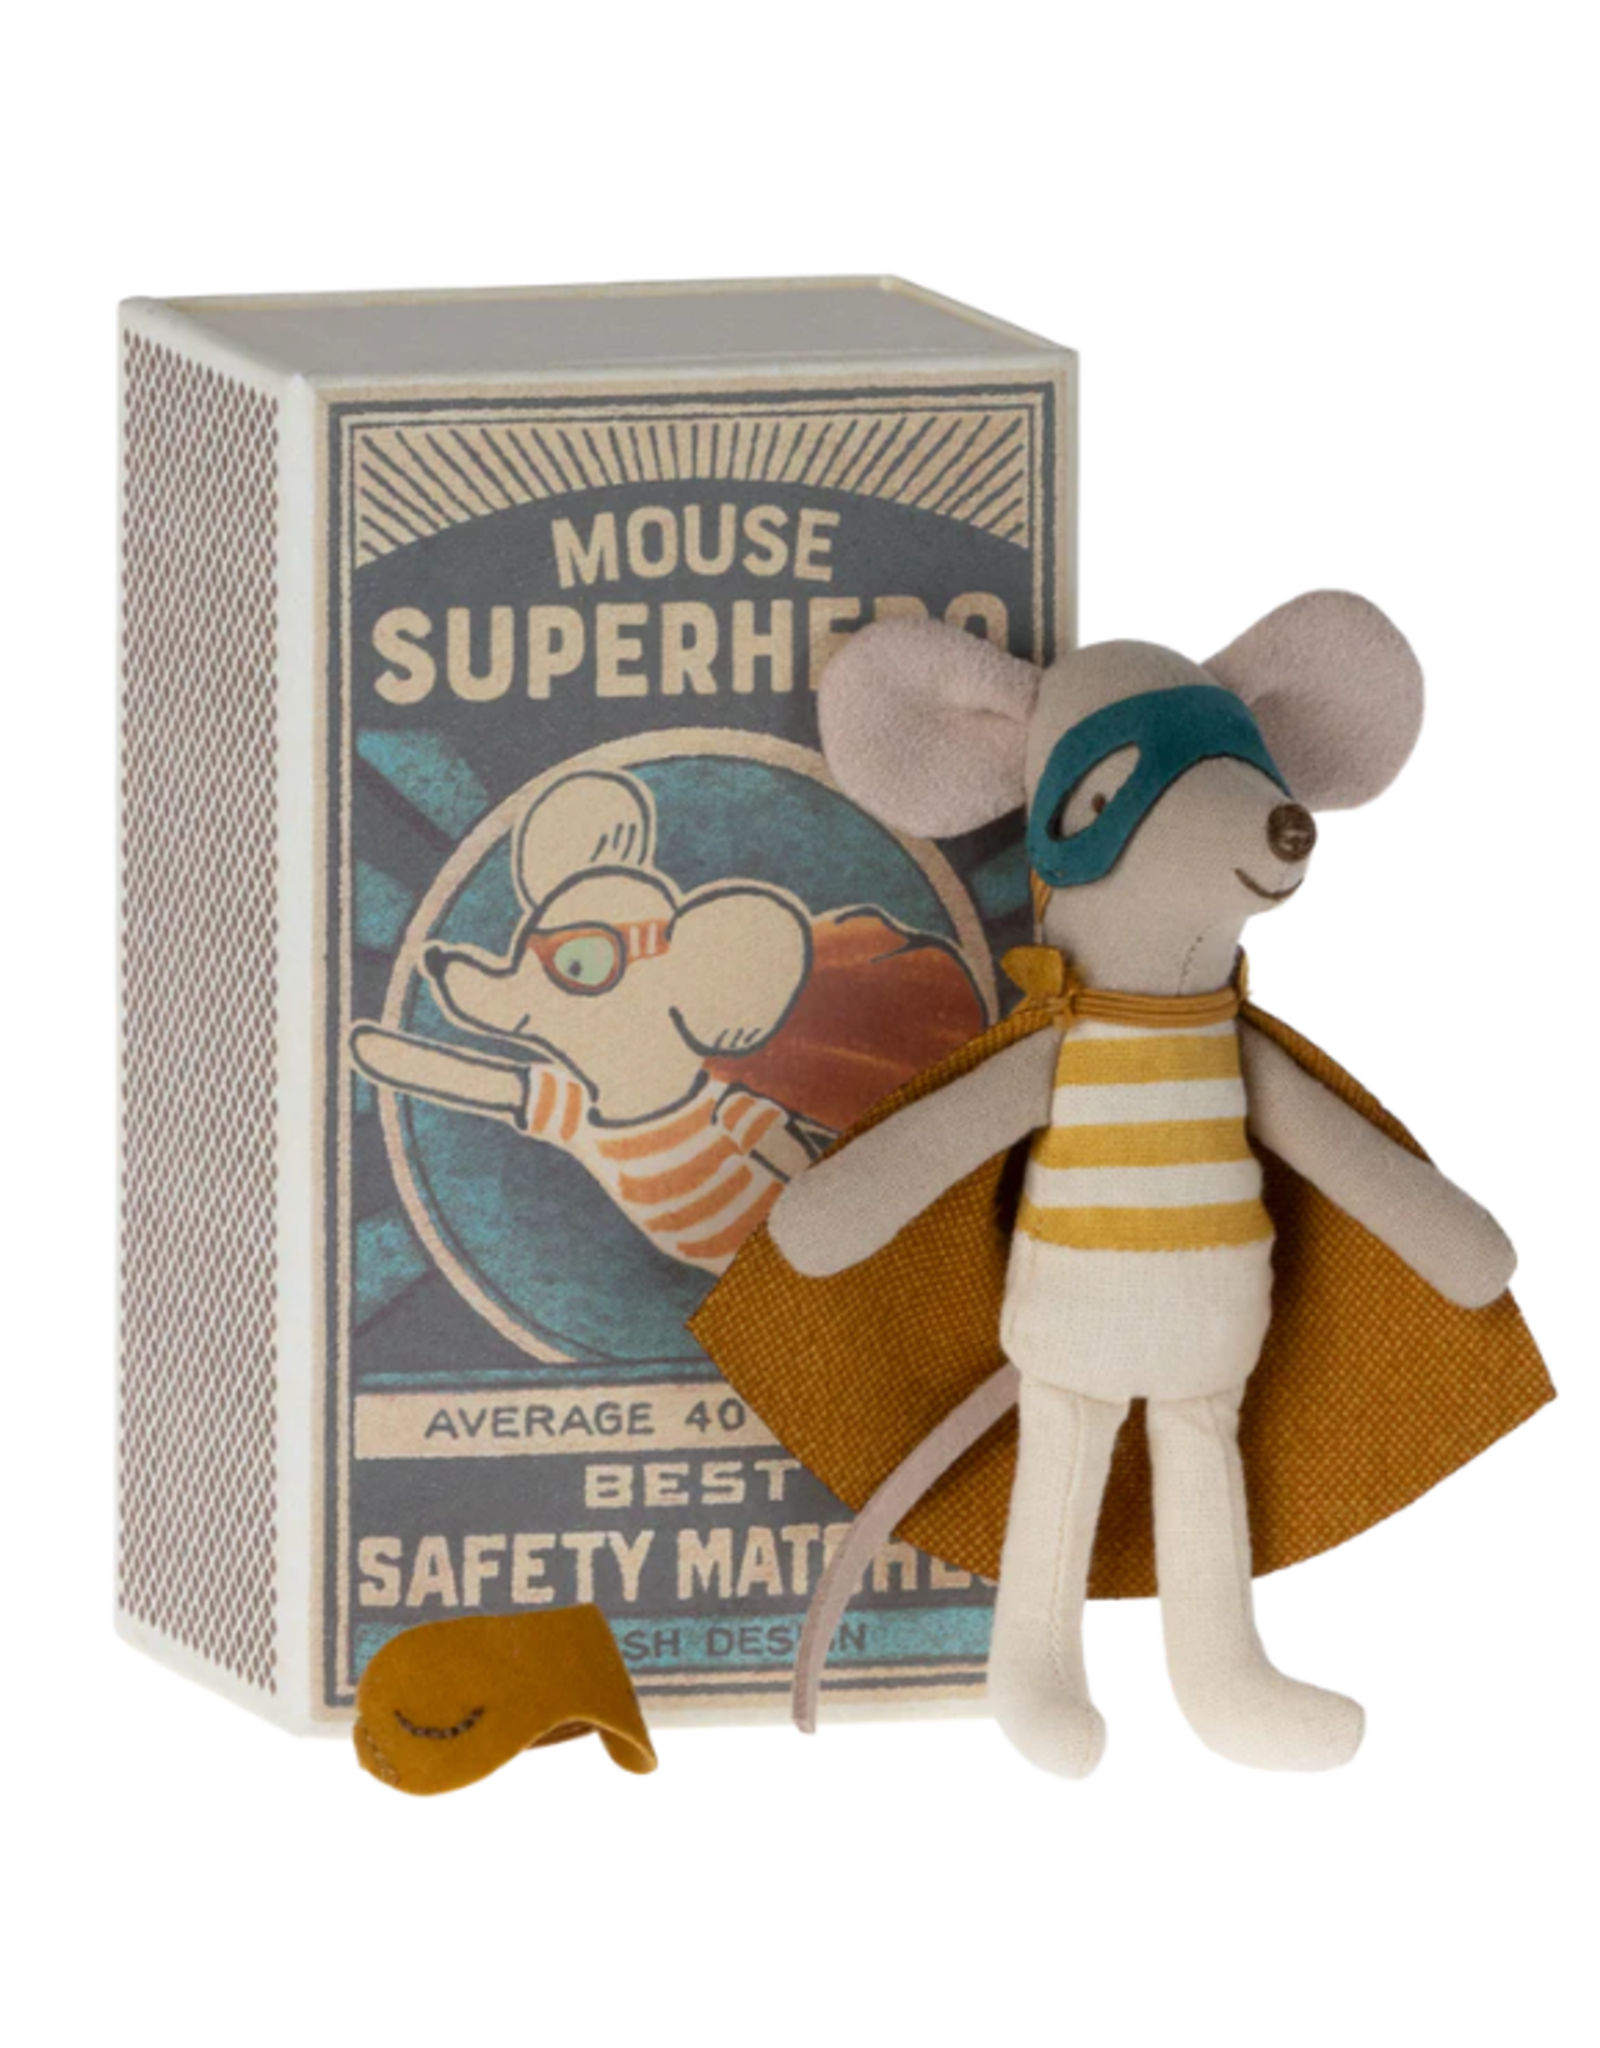 MAILEG Superhero mouse, little brother in matchox